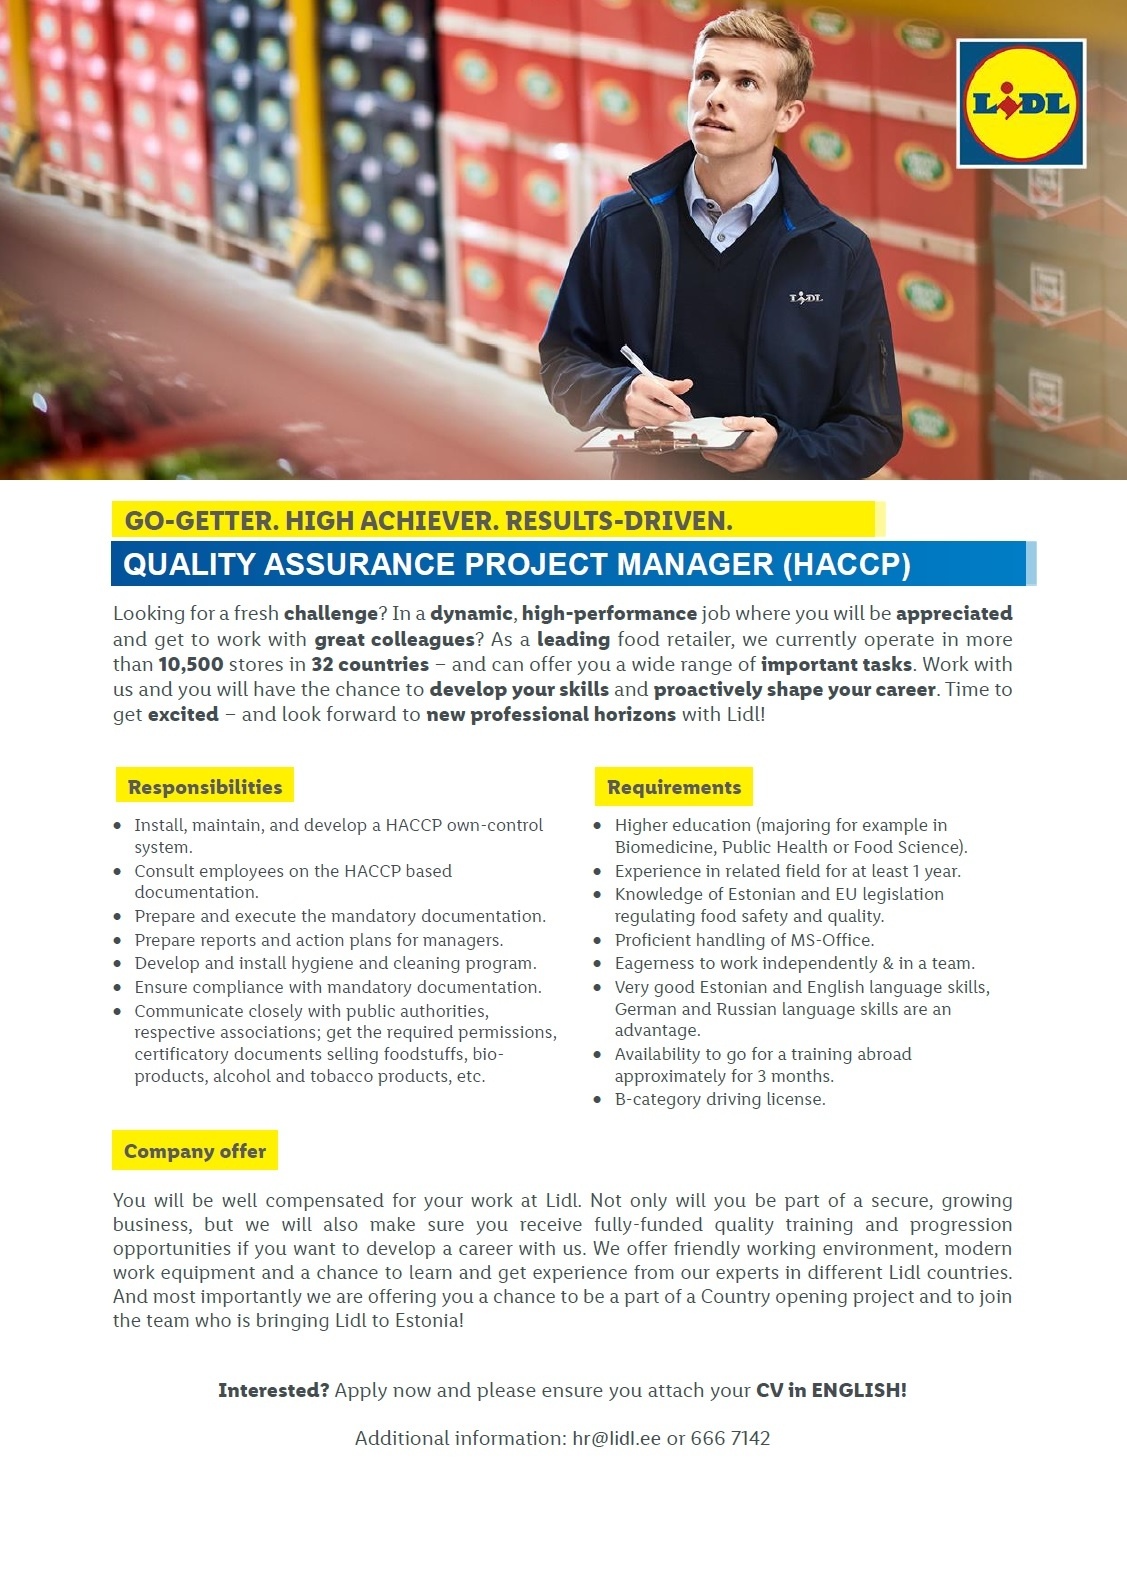 Lidl Eesti OÜ Quality Assurance Project Manager (HACCP)